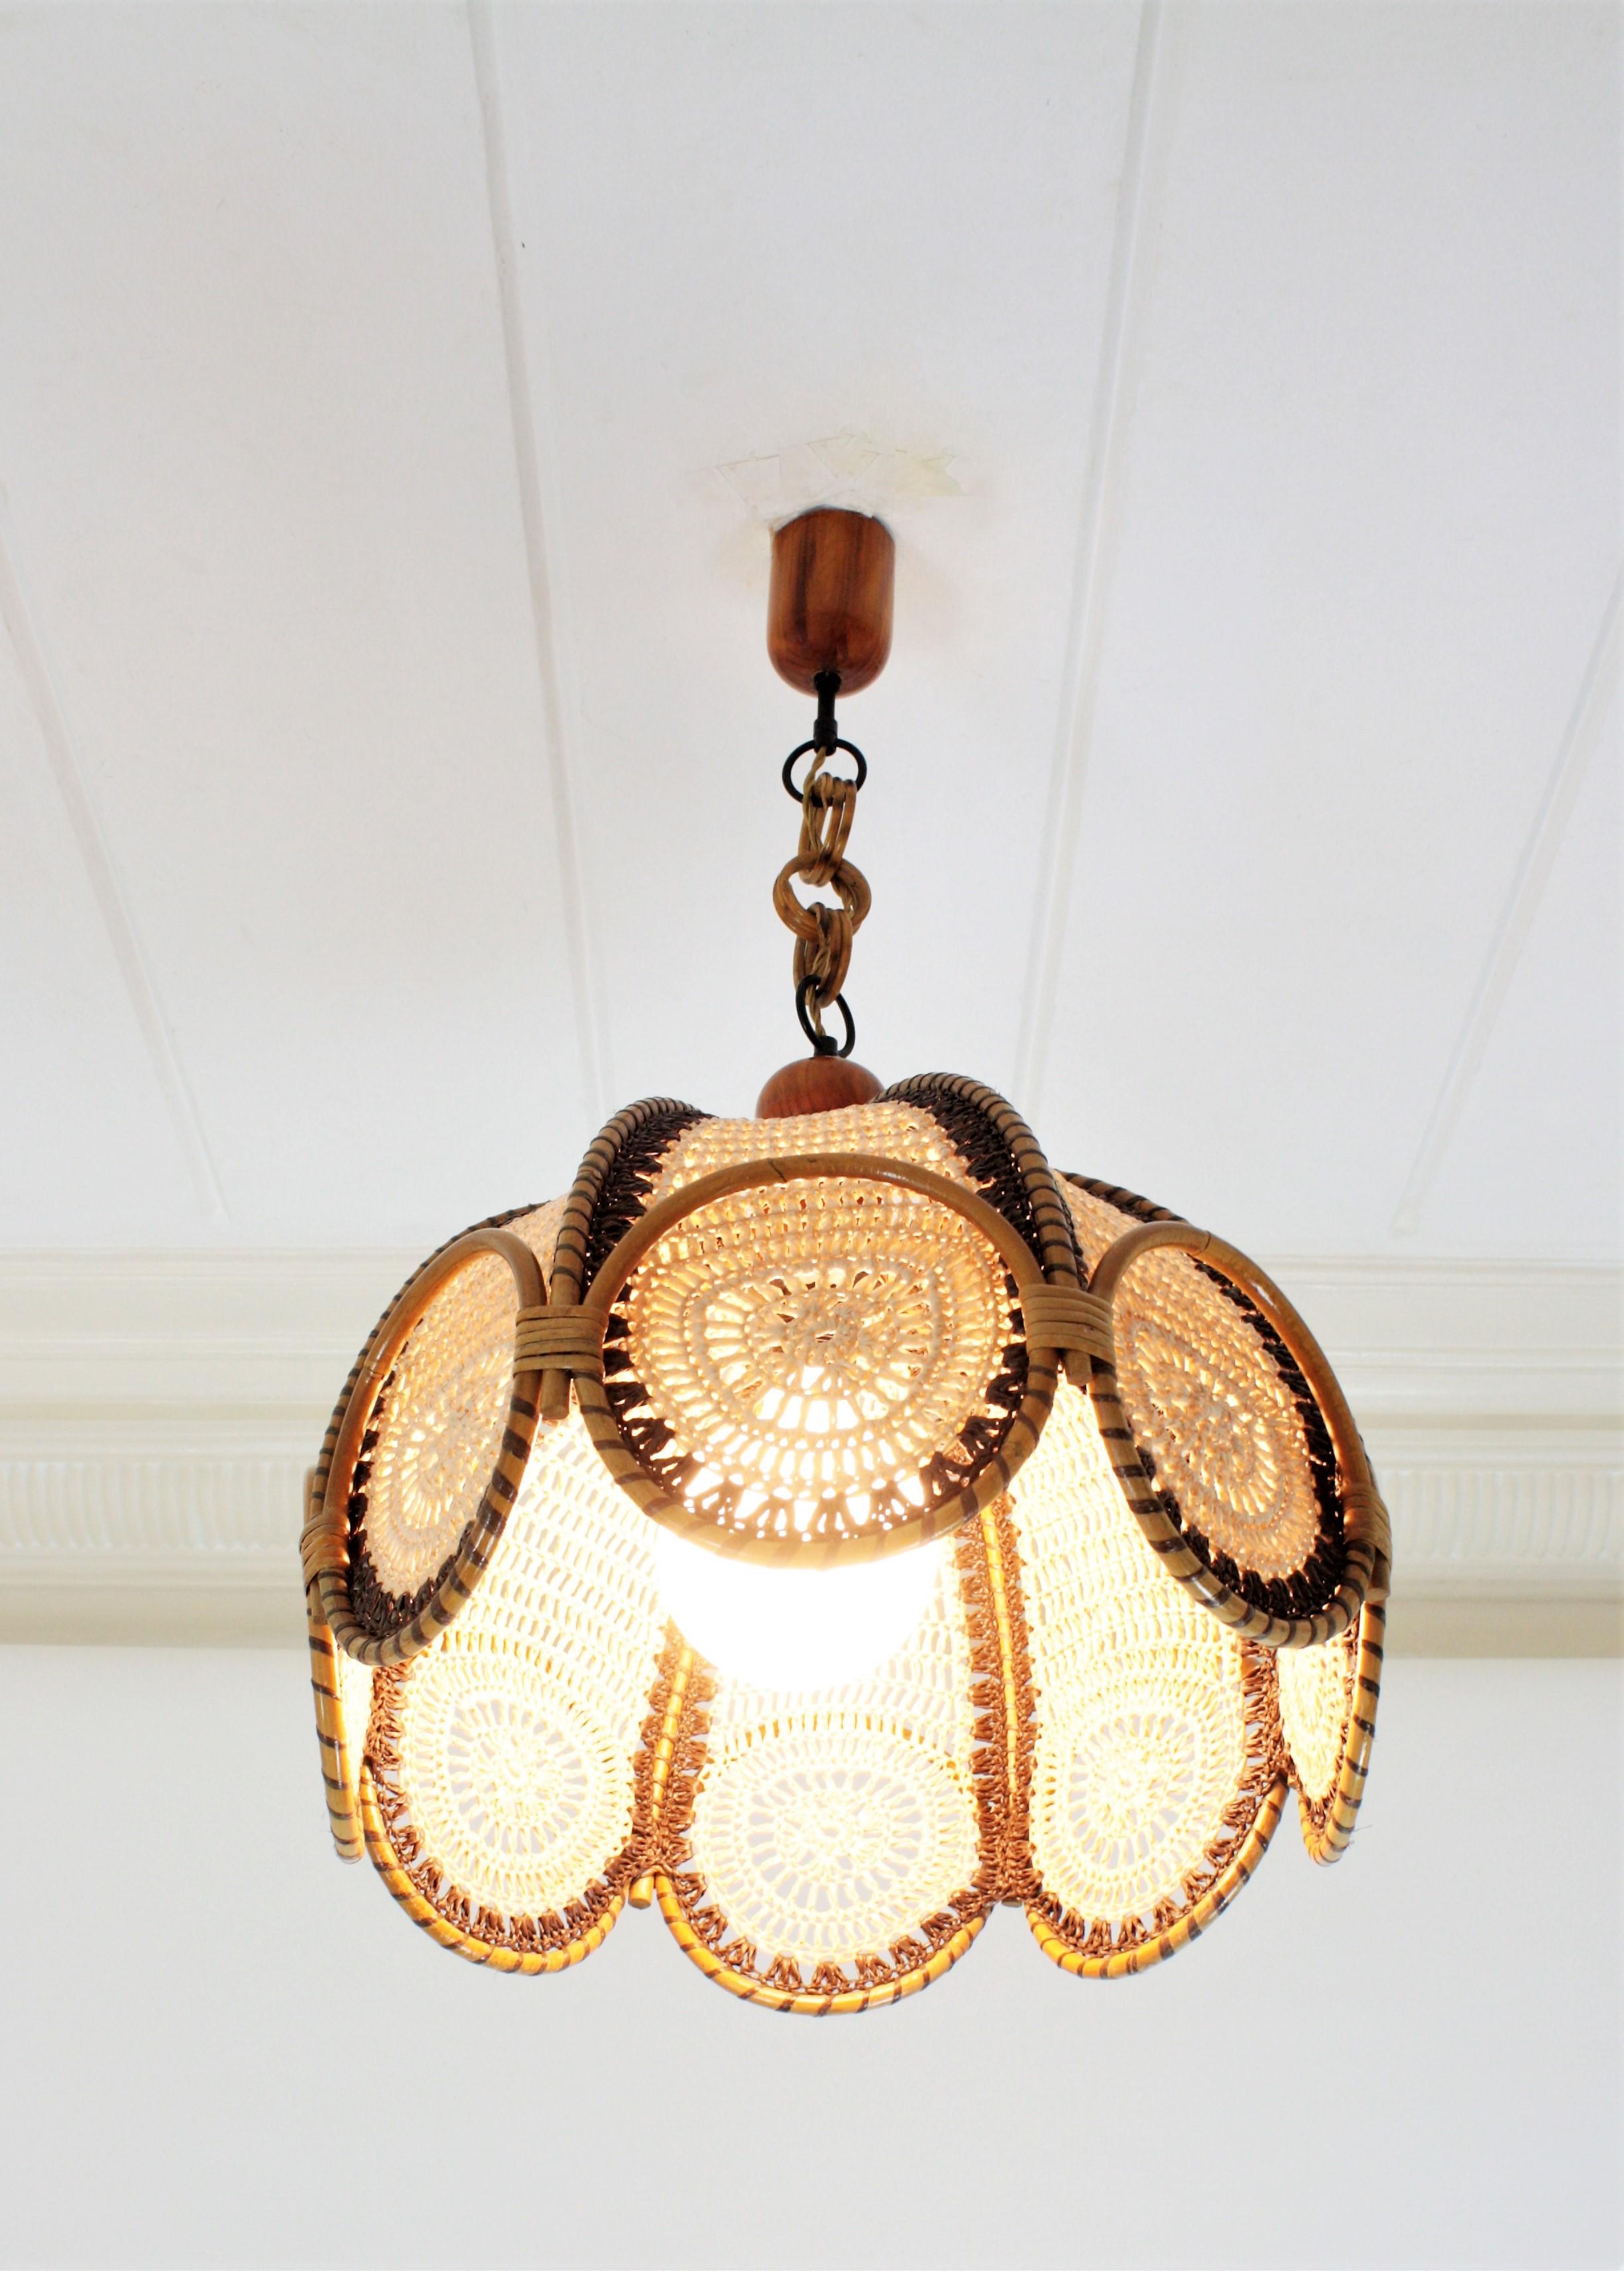 20th Century Spanish Modernist Beige and Brown Macramé Large Pendant Lamp with Rattan Rings